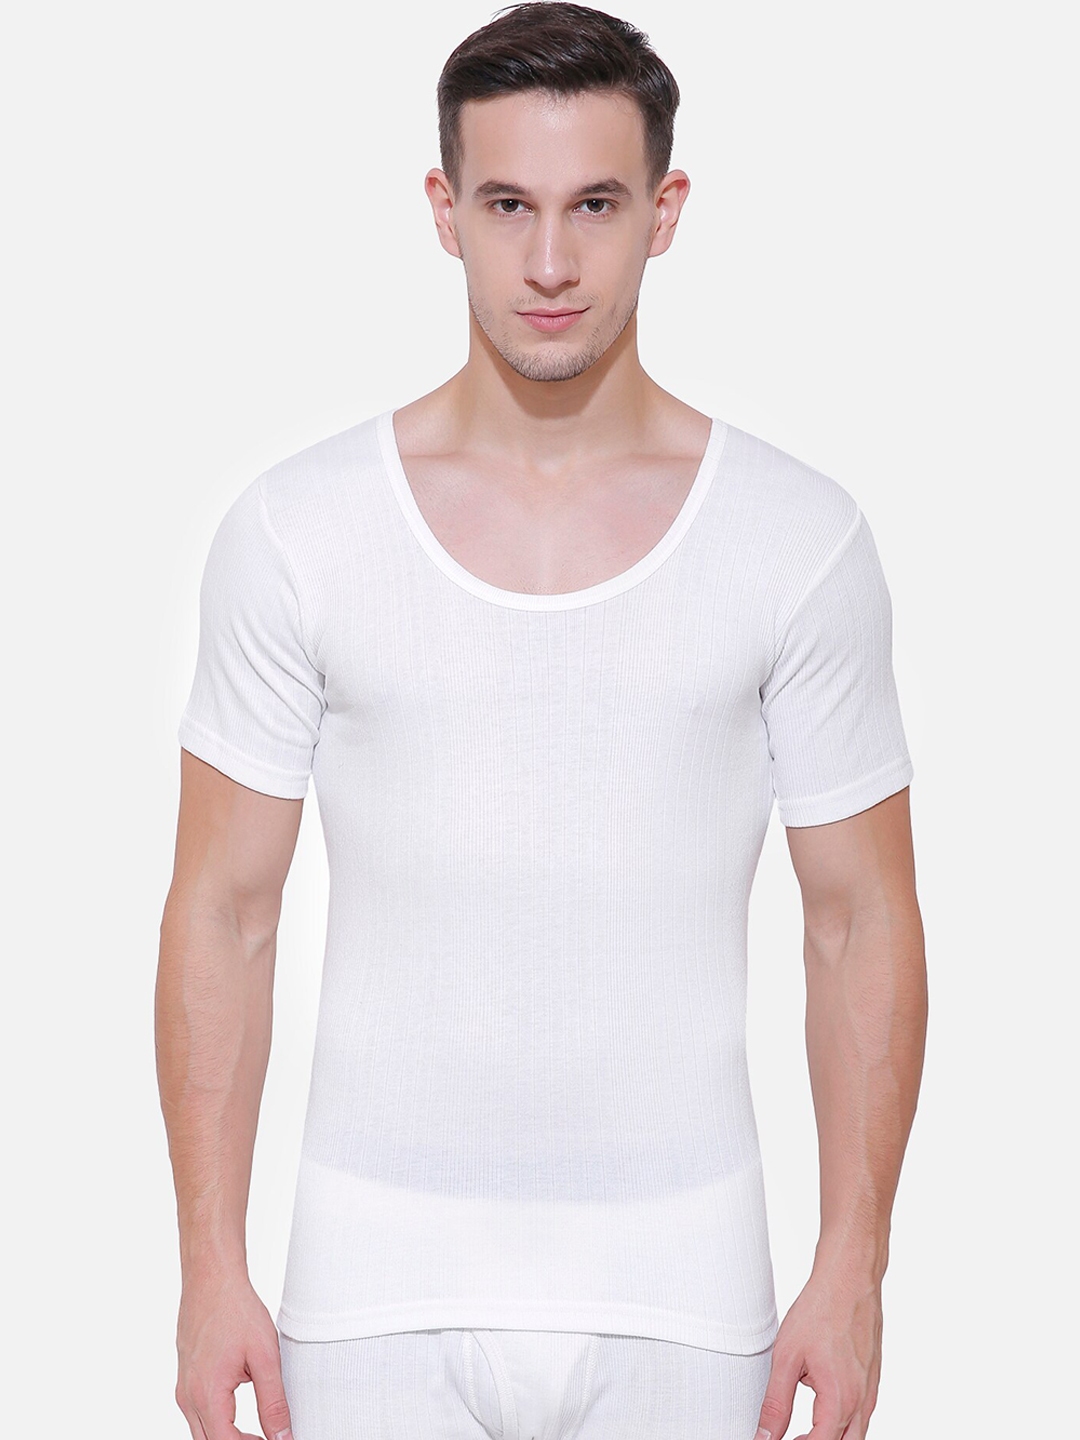 Buy BODYCARE INSIDER Men White Solid Thermal T Shirt - Thermal